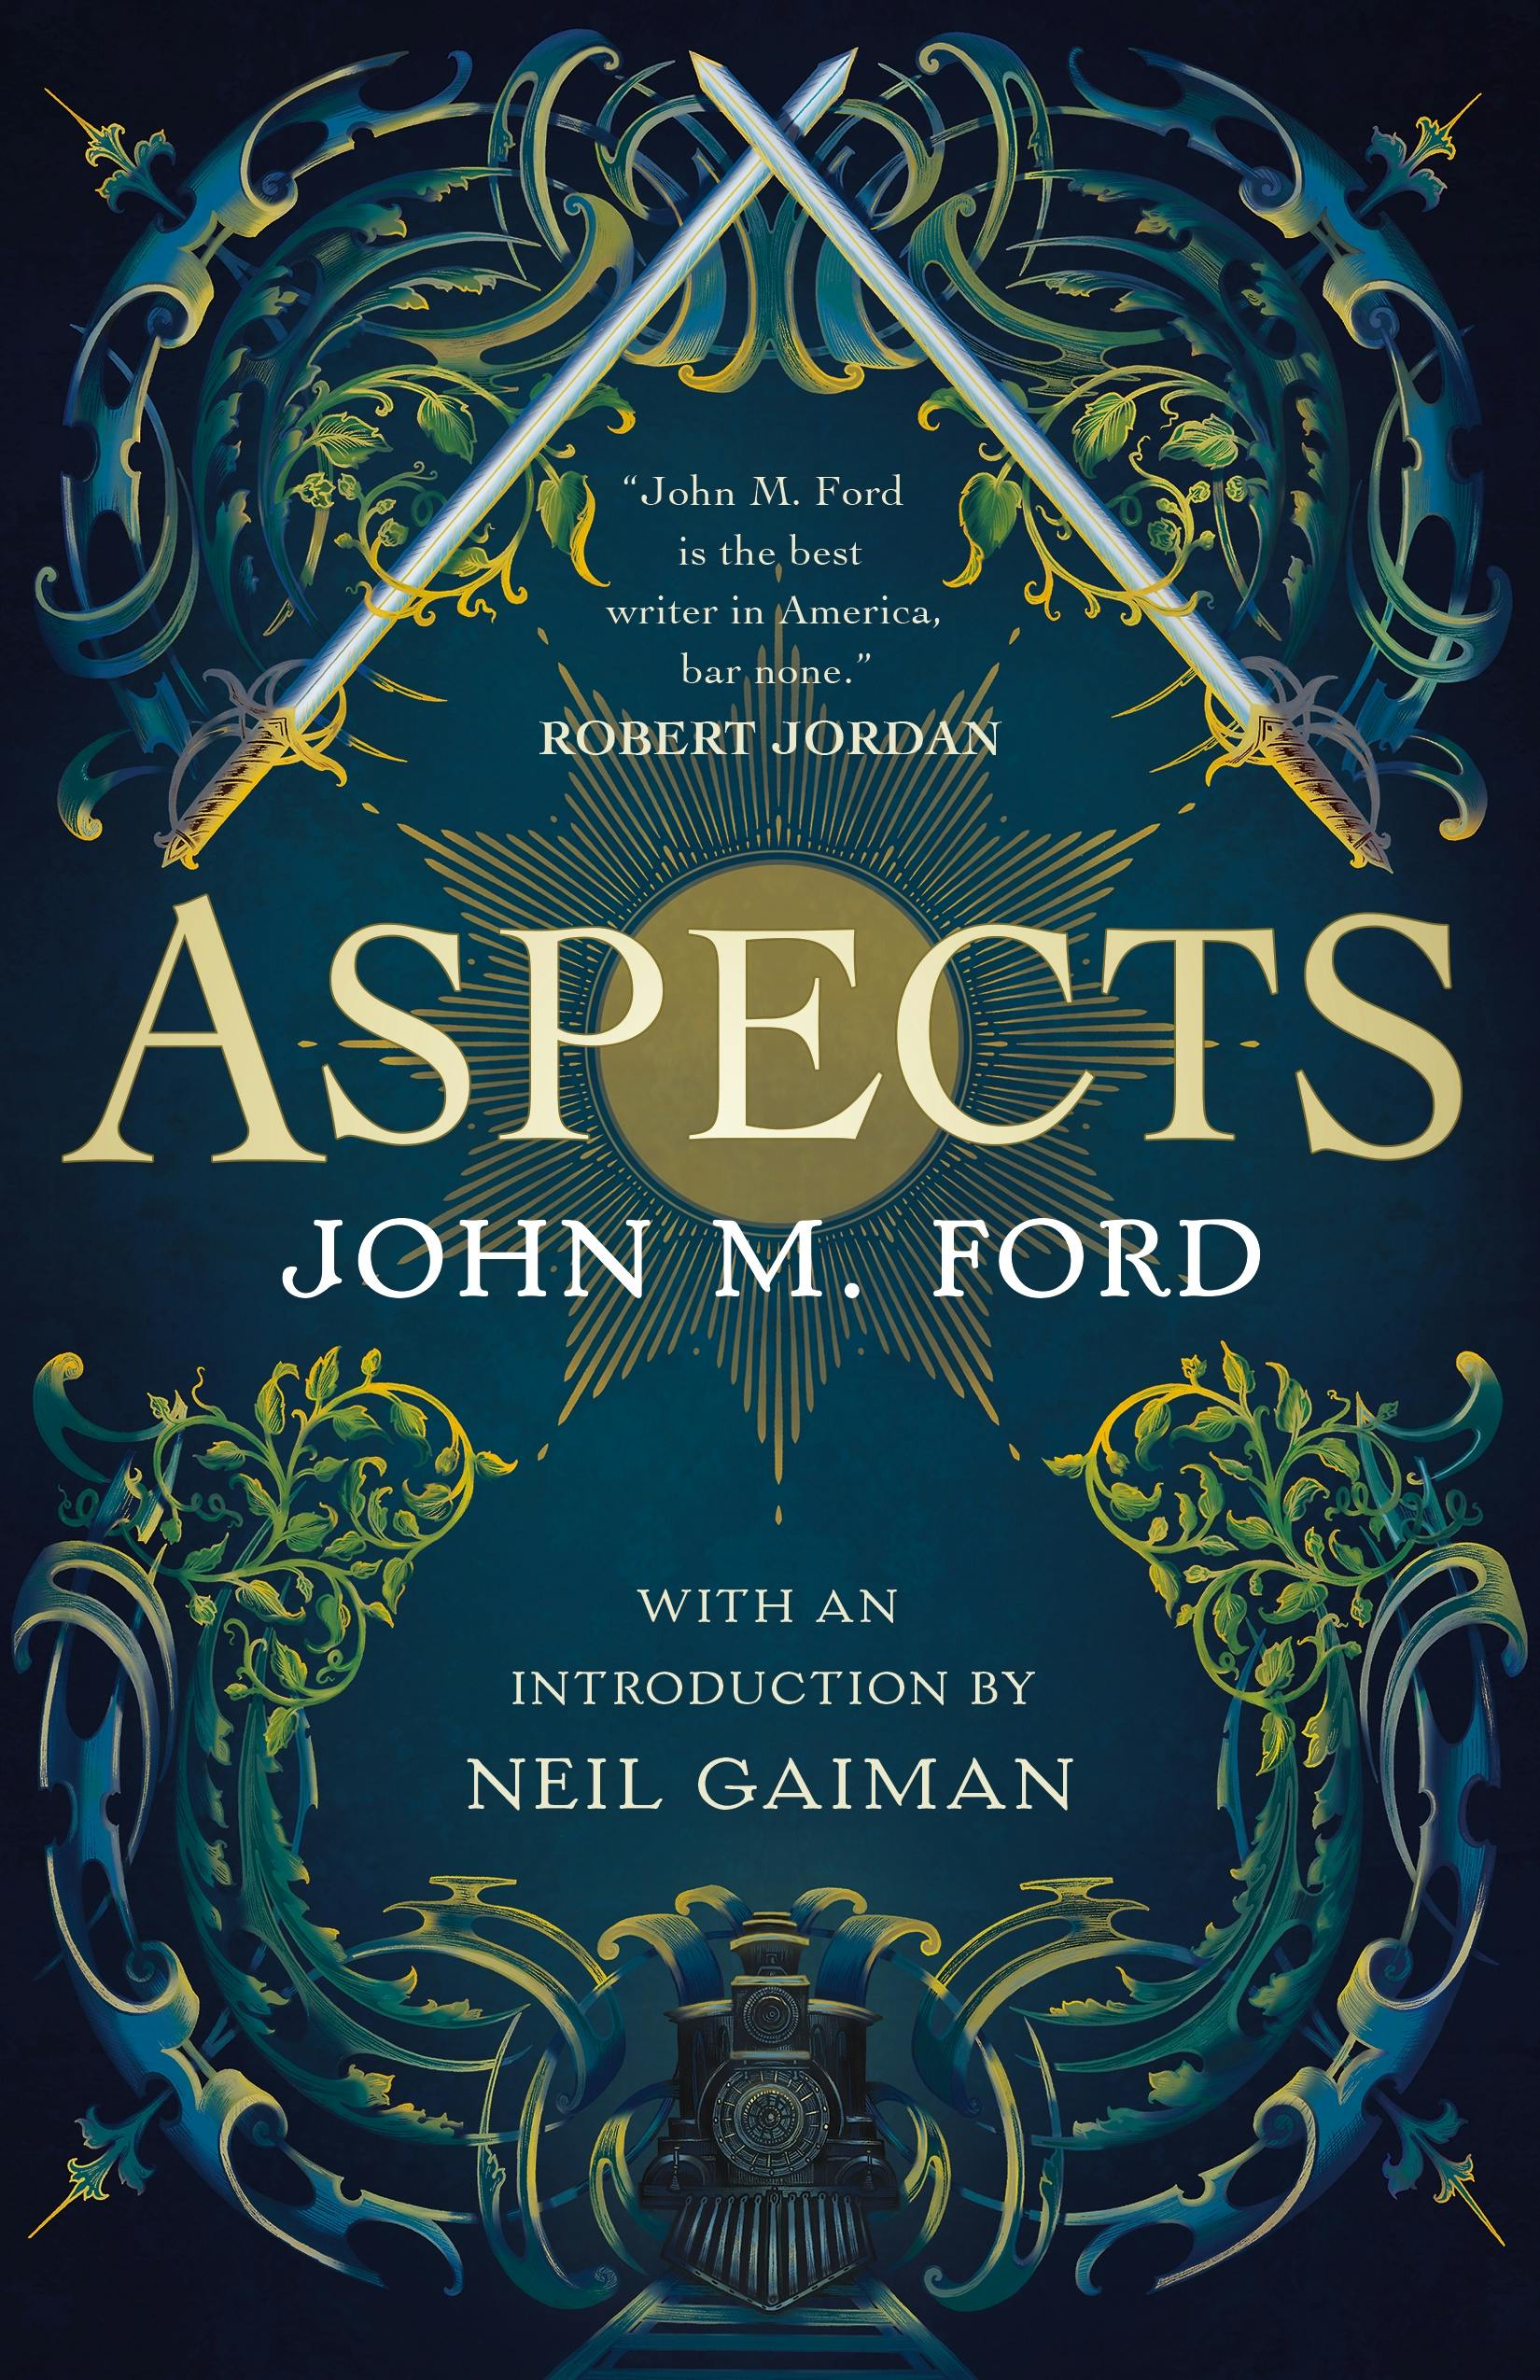 Cover for the book titled as: Aspects